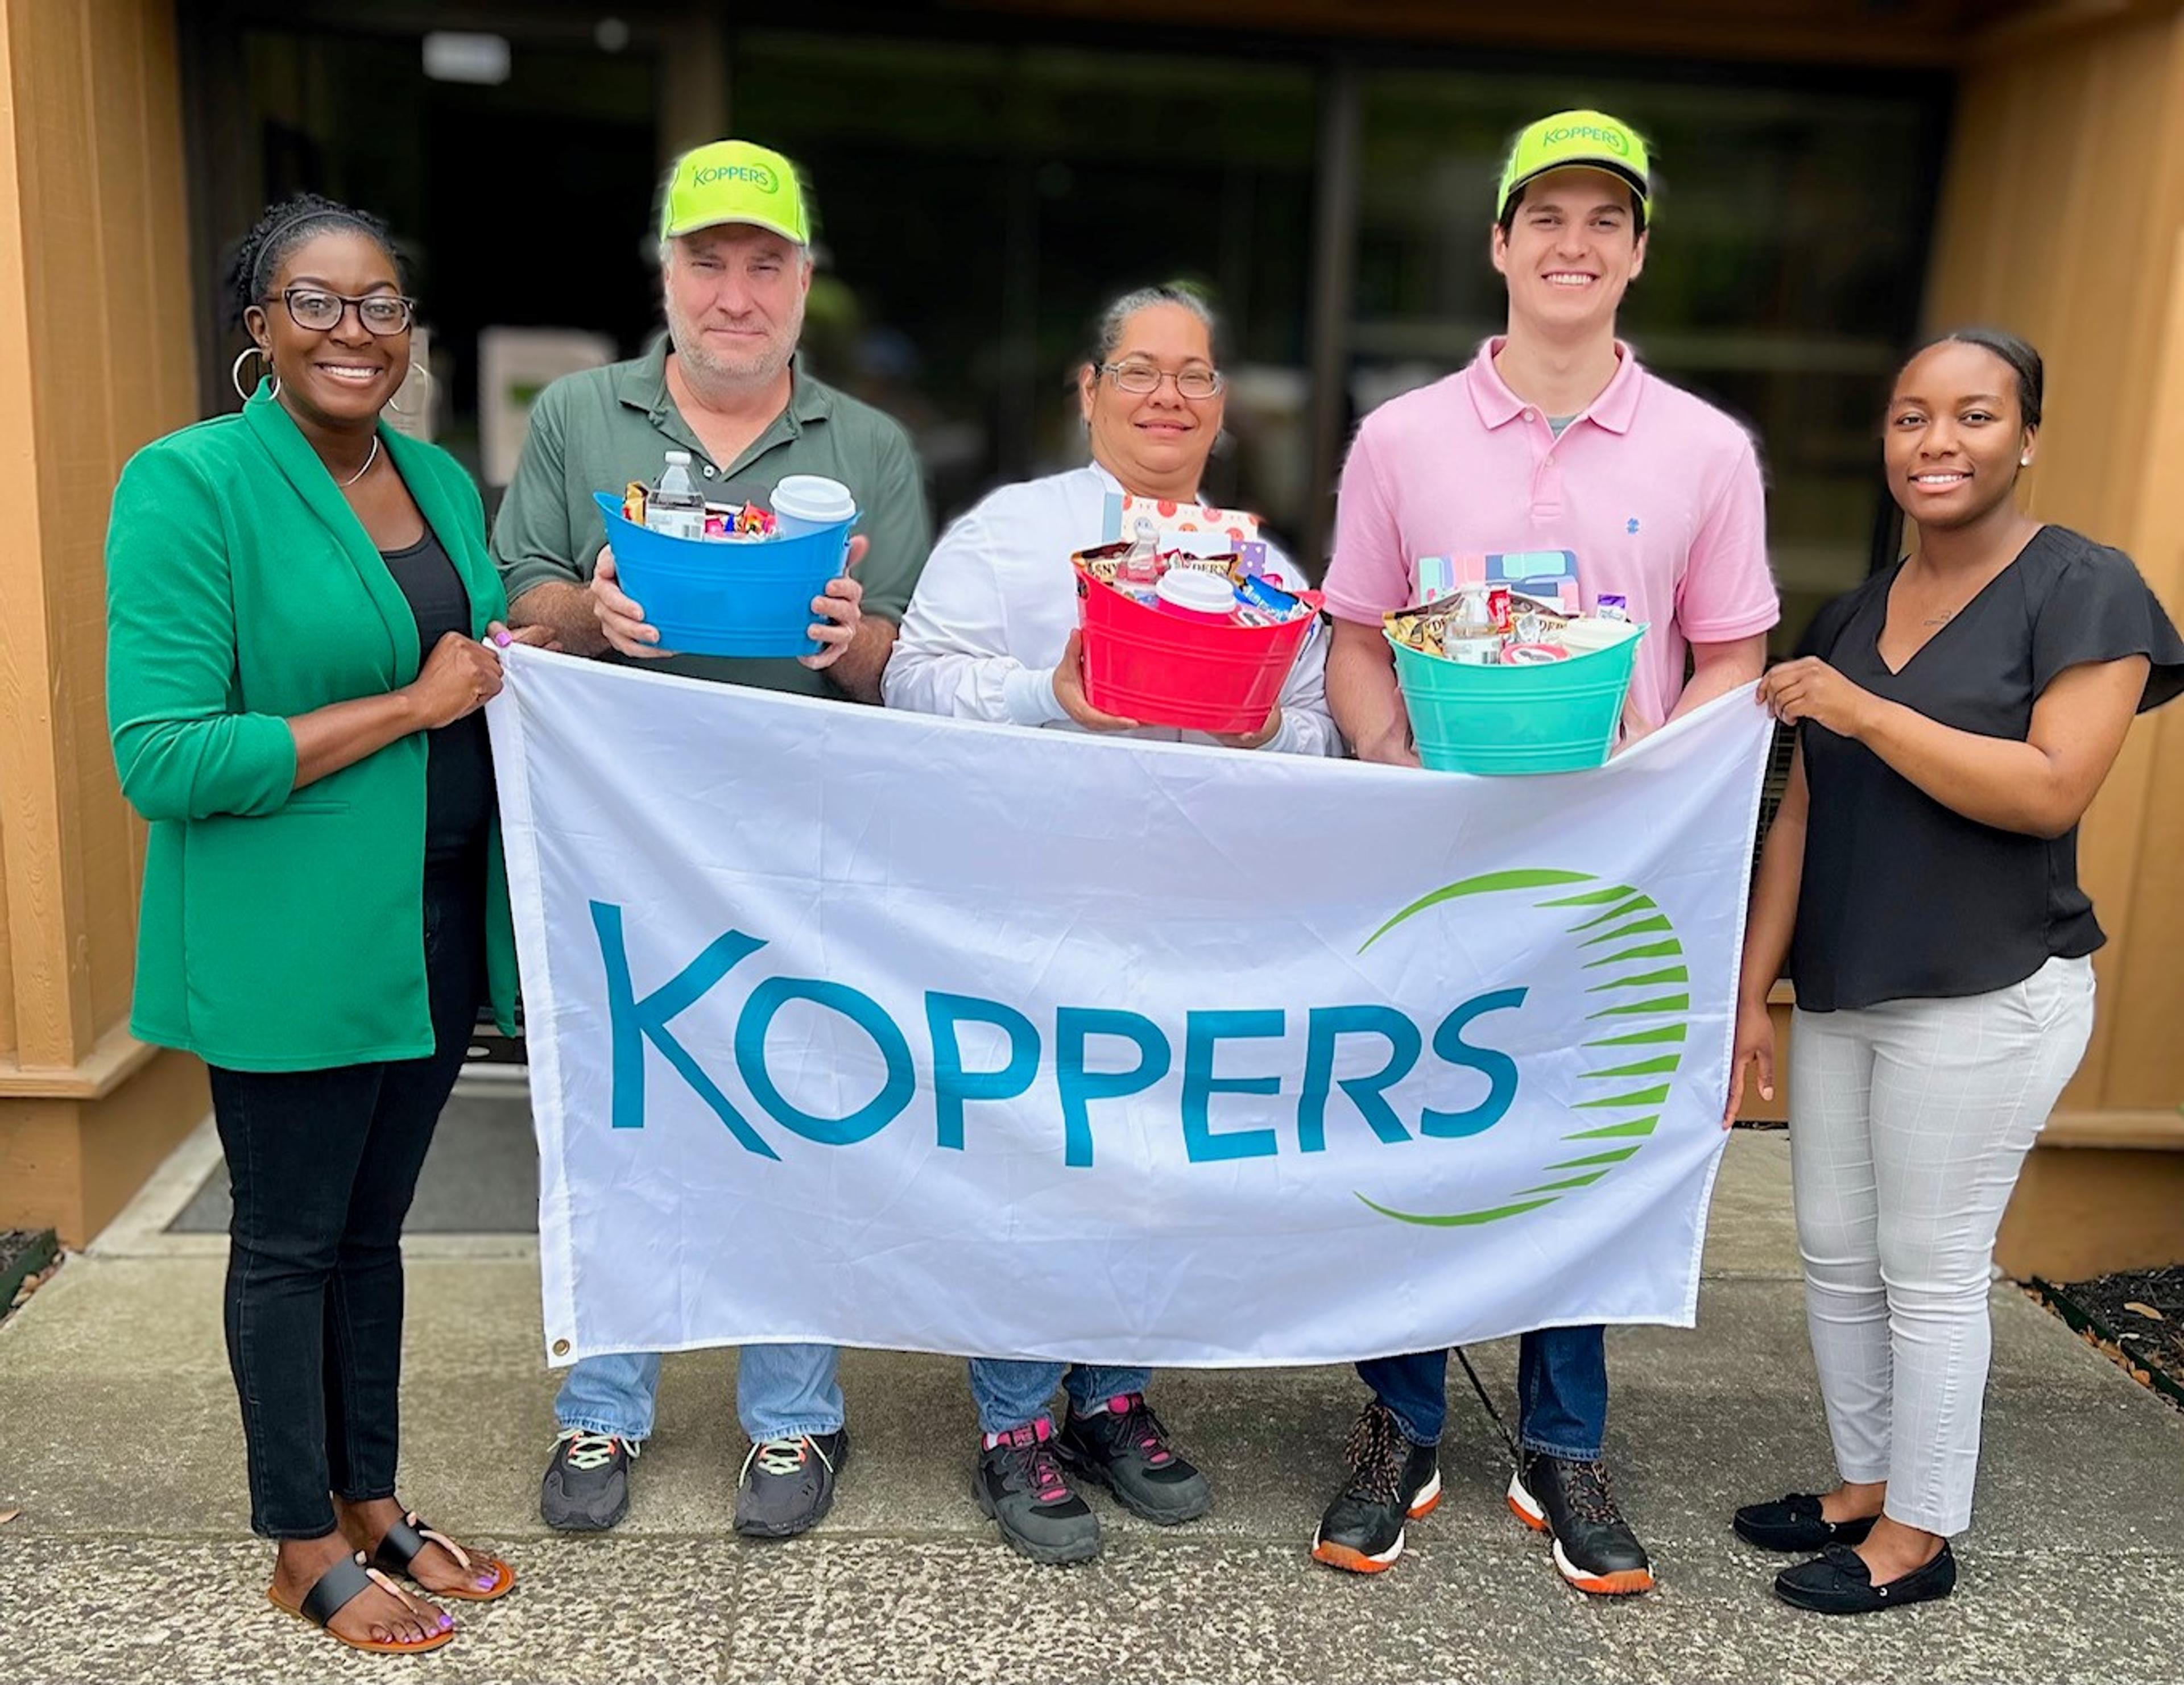 People posing with a Koppers banner